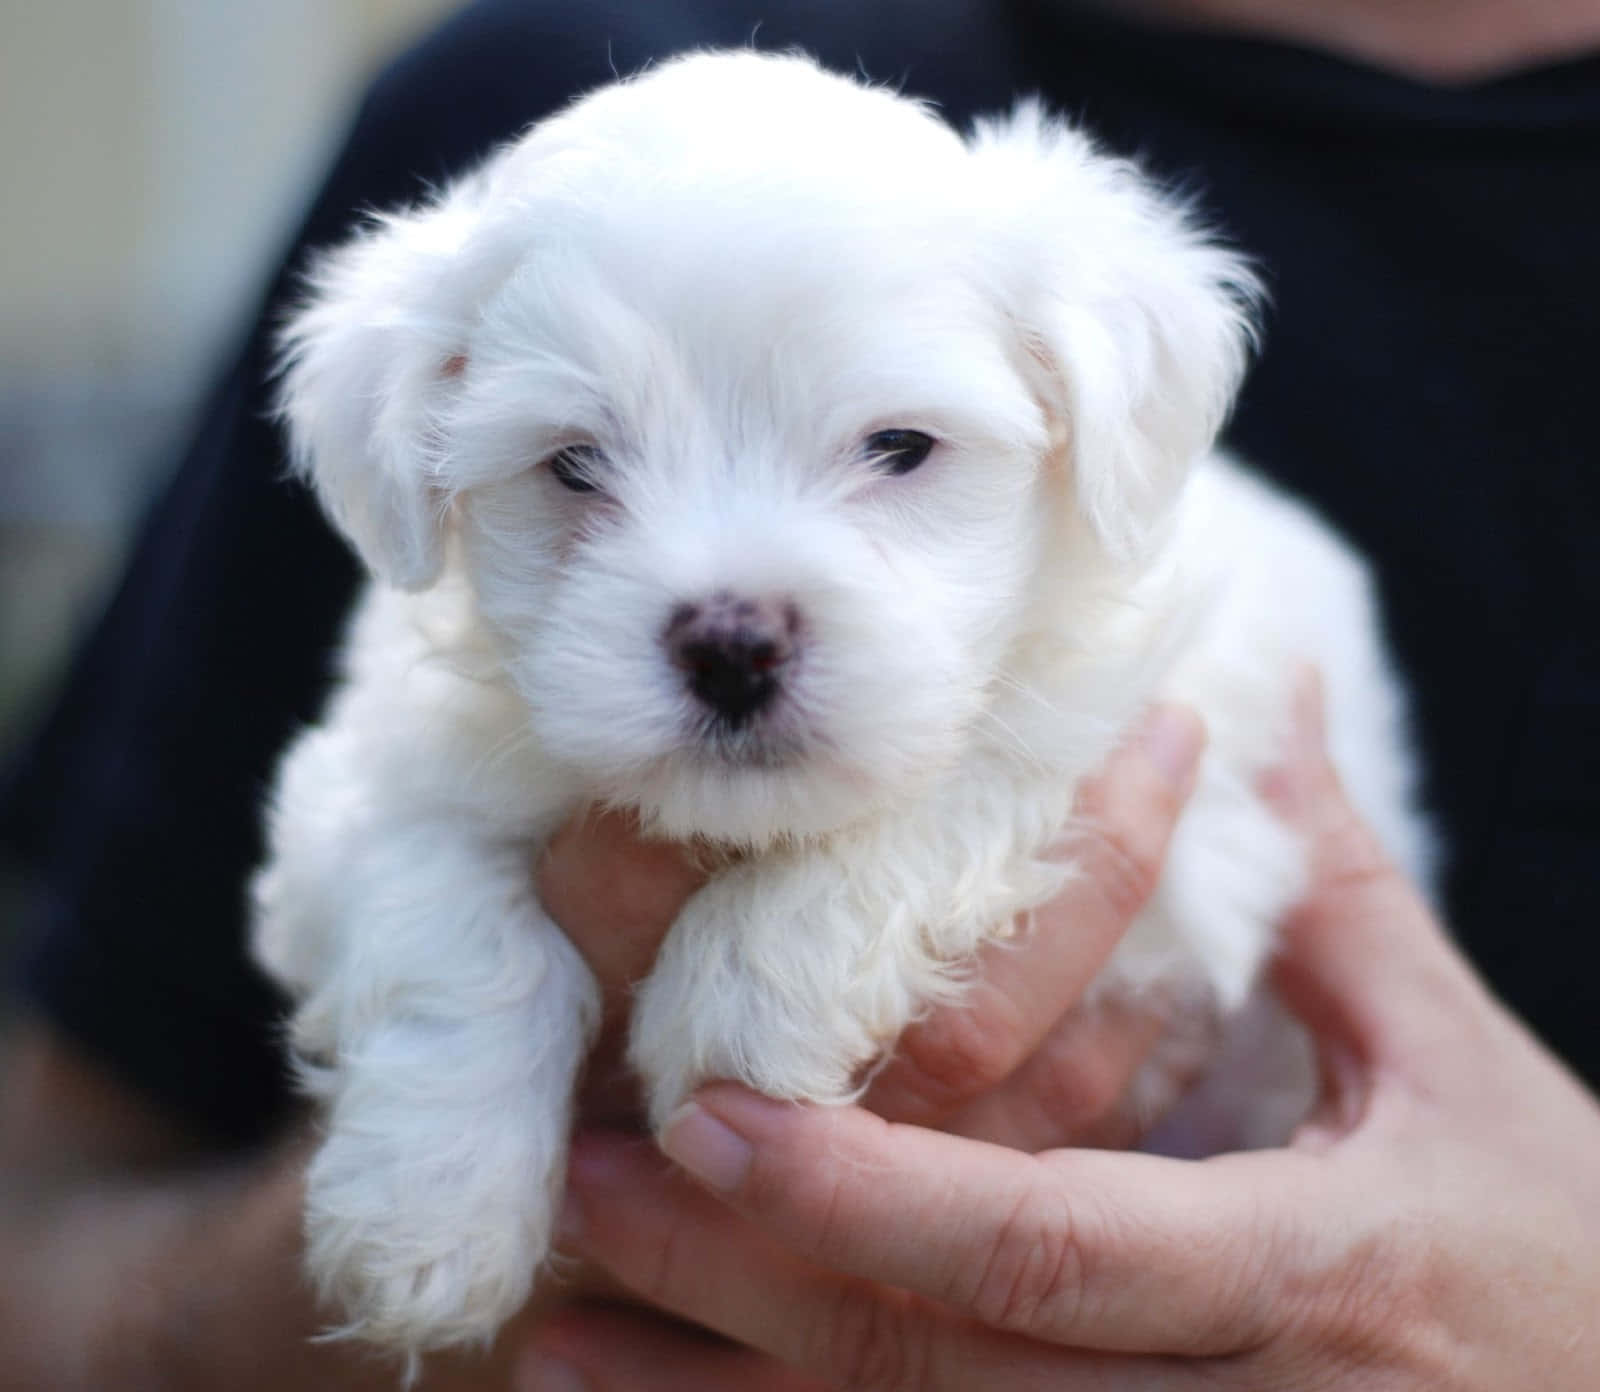 A White Puppy Is Being Held In A Person's Hands